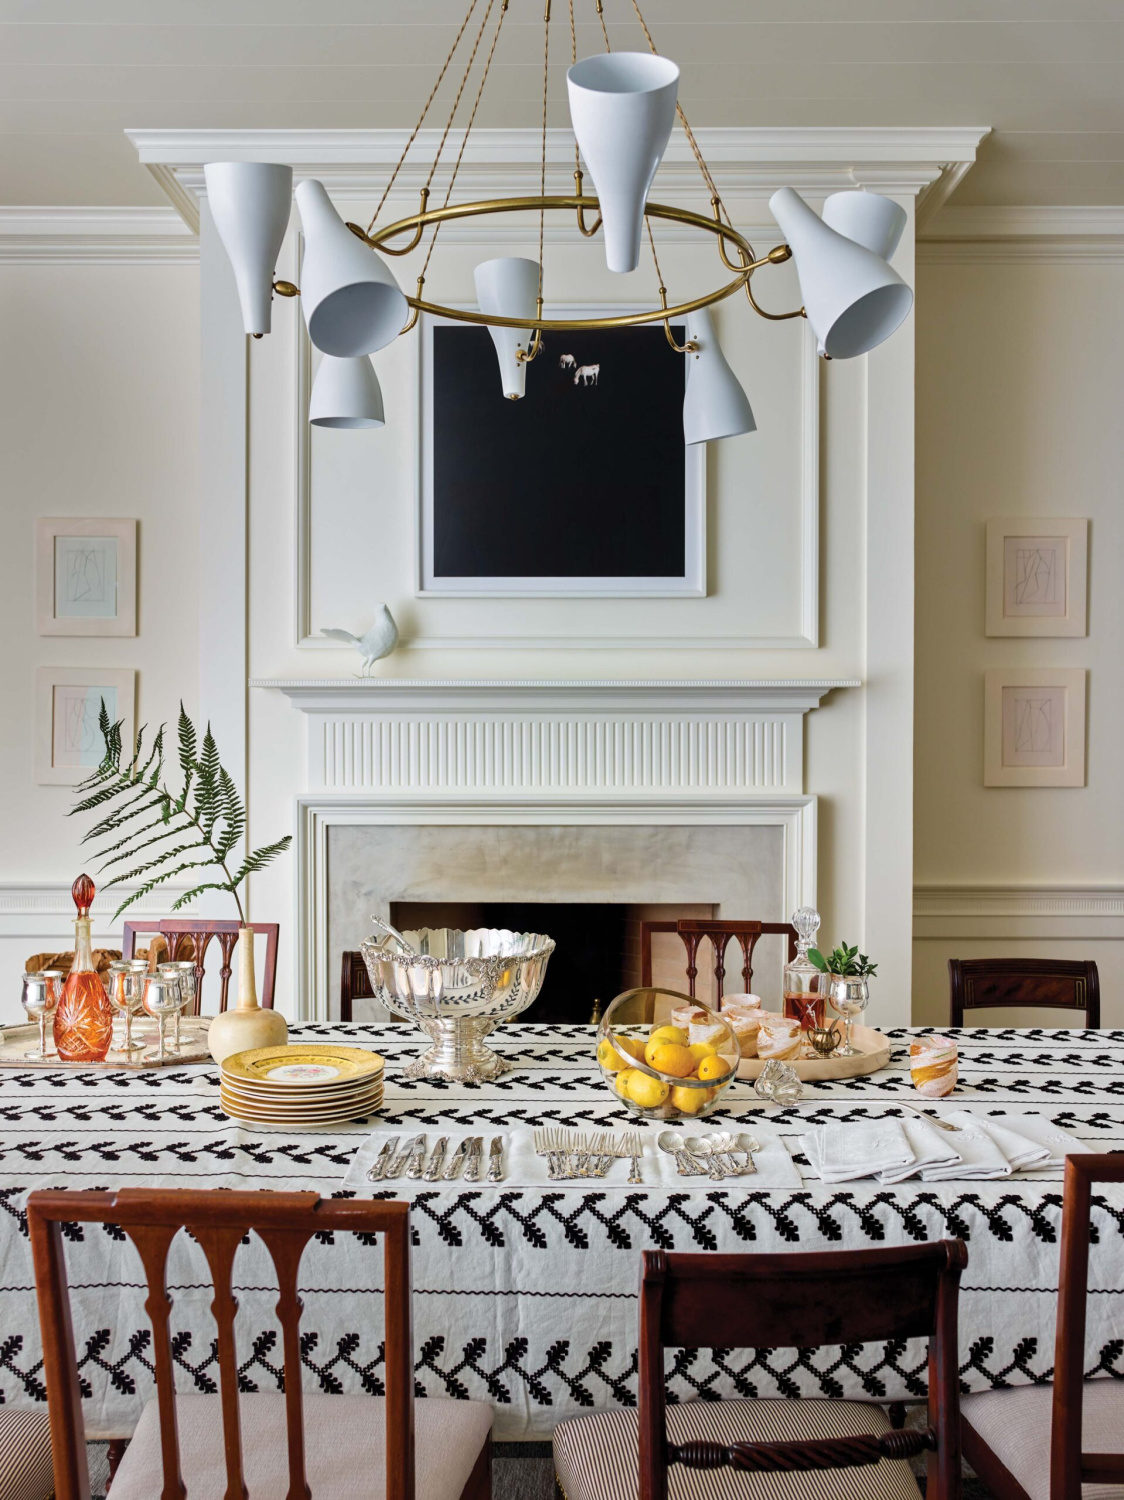 Dining room in a newly built regency style home - architecture: Stanley Dixon; interior design: Carolyn Malone; photo: Eric Piasecki.